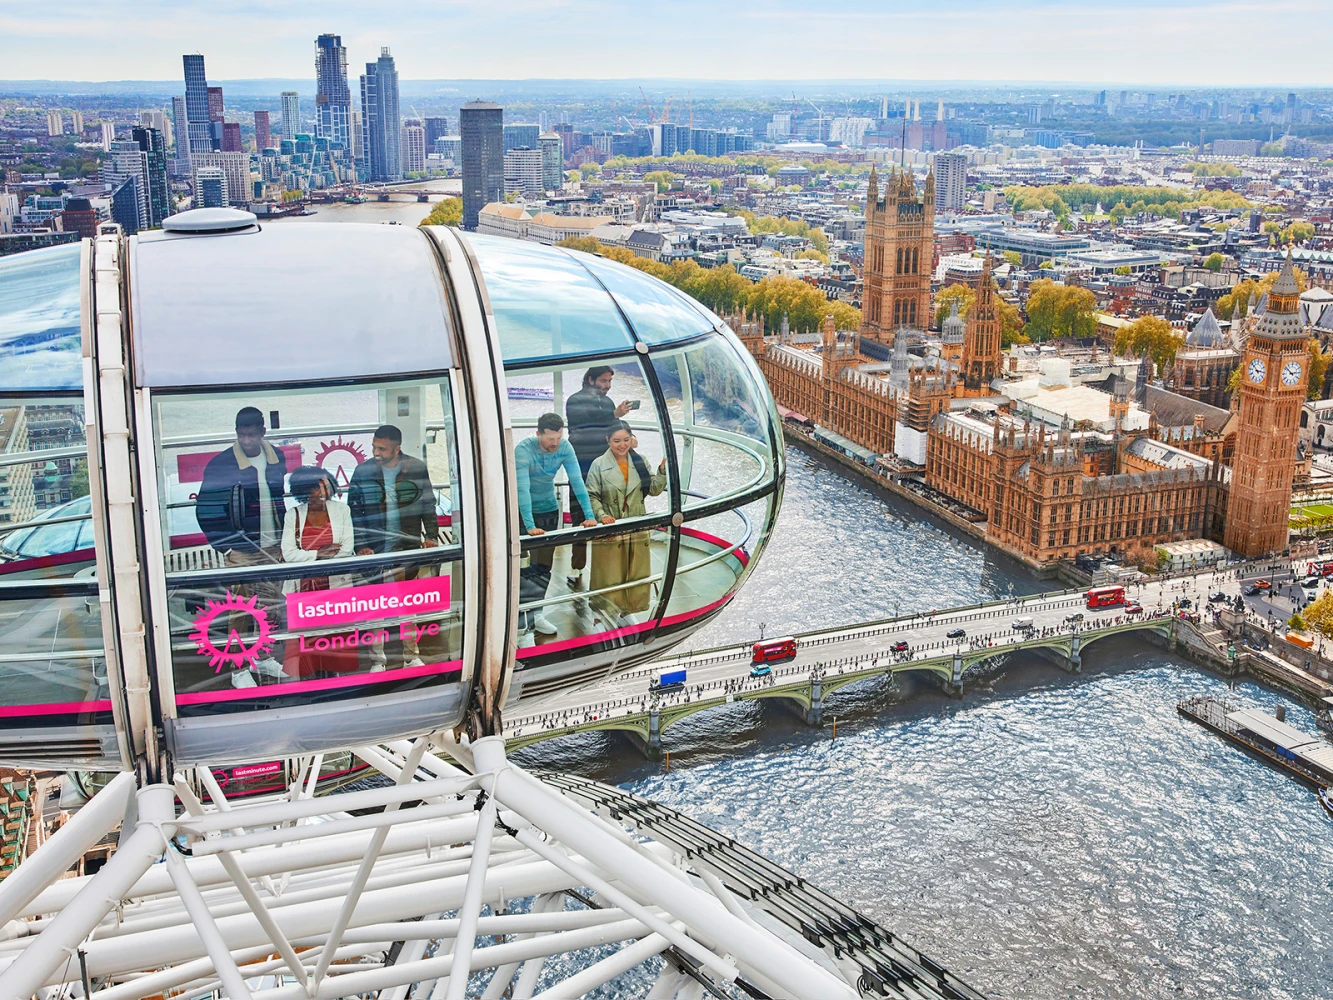 The lastminute.com London Eye Standard Experience: What to expect - 1